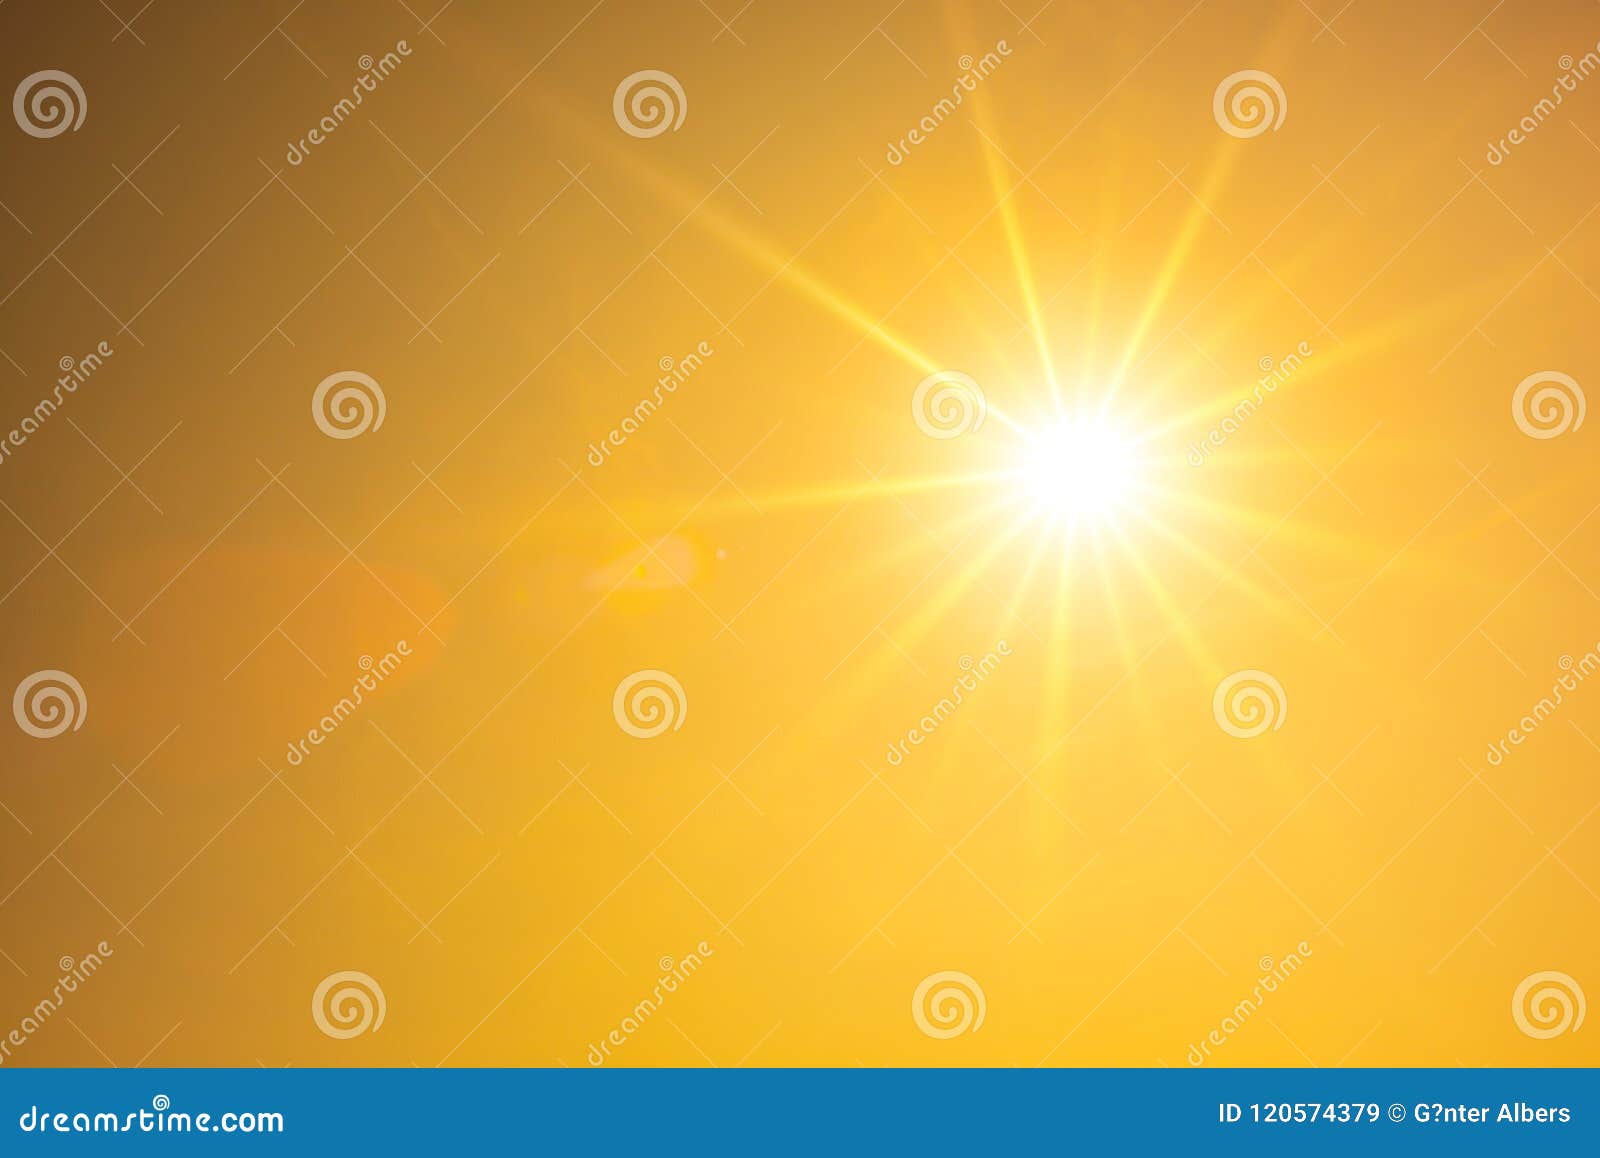 hot summer or heat wave background, orange sky with glowing sun